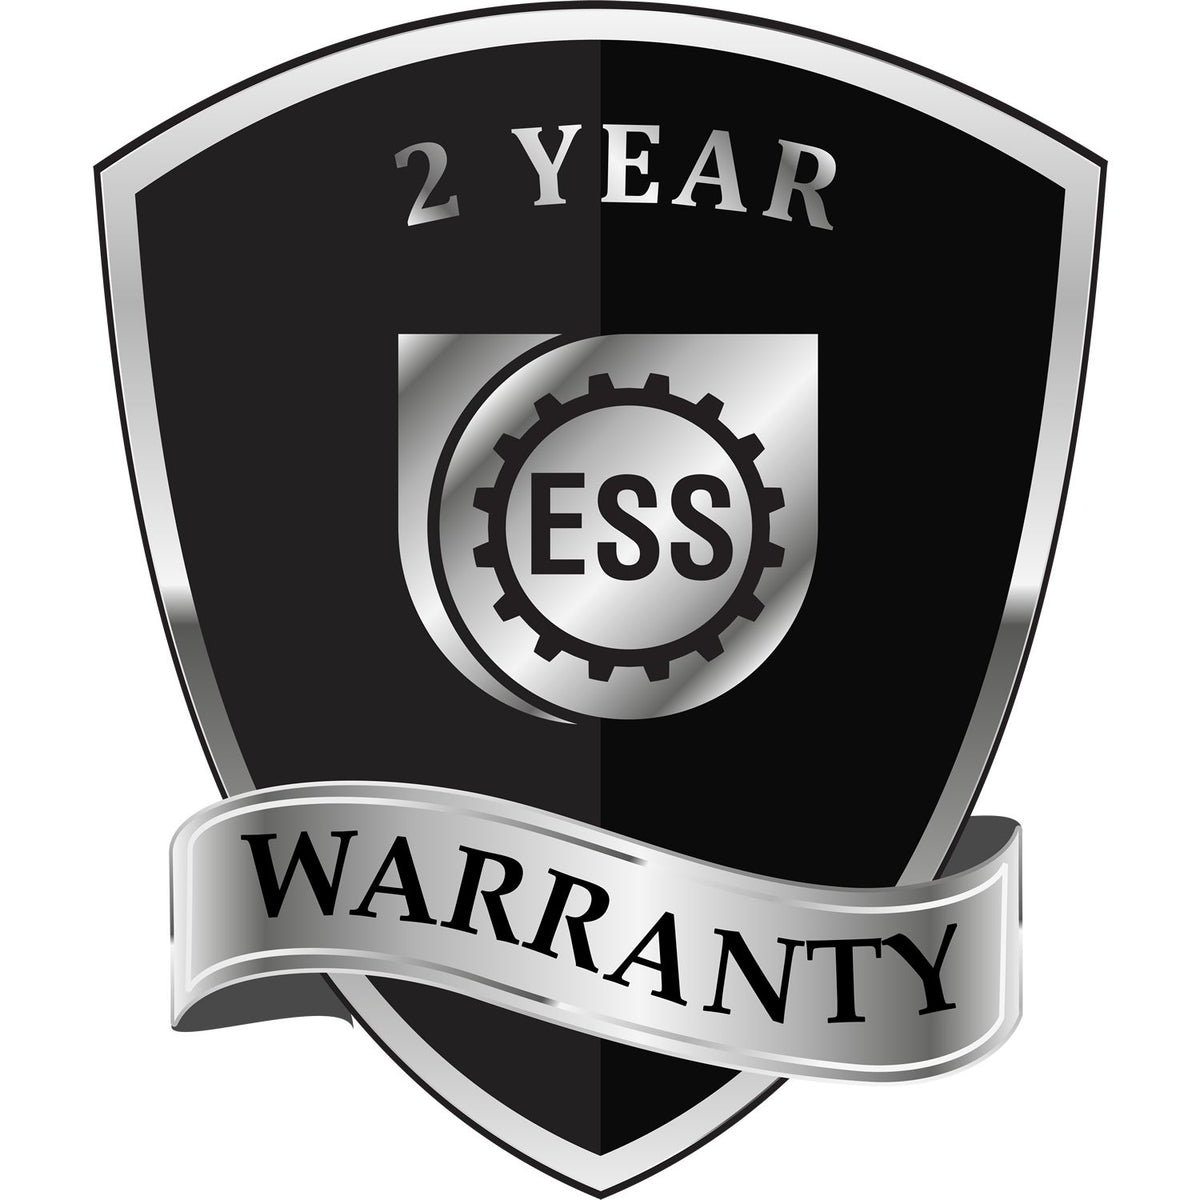 A badge or emblem showing a warranty icon for the Heavy Duty Cast Iron Massachusetts Engineer Seal Embosser